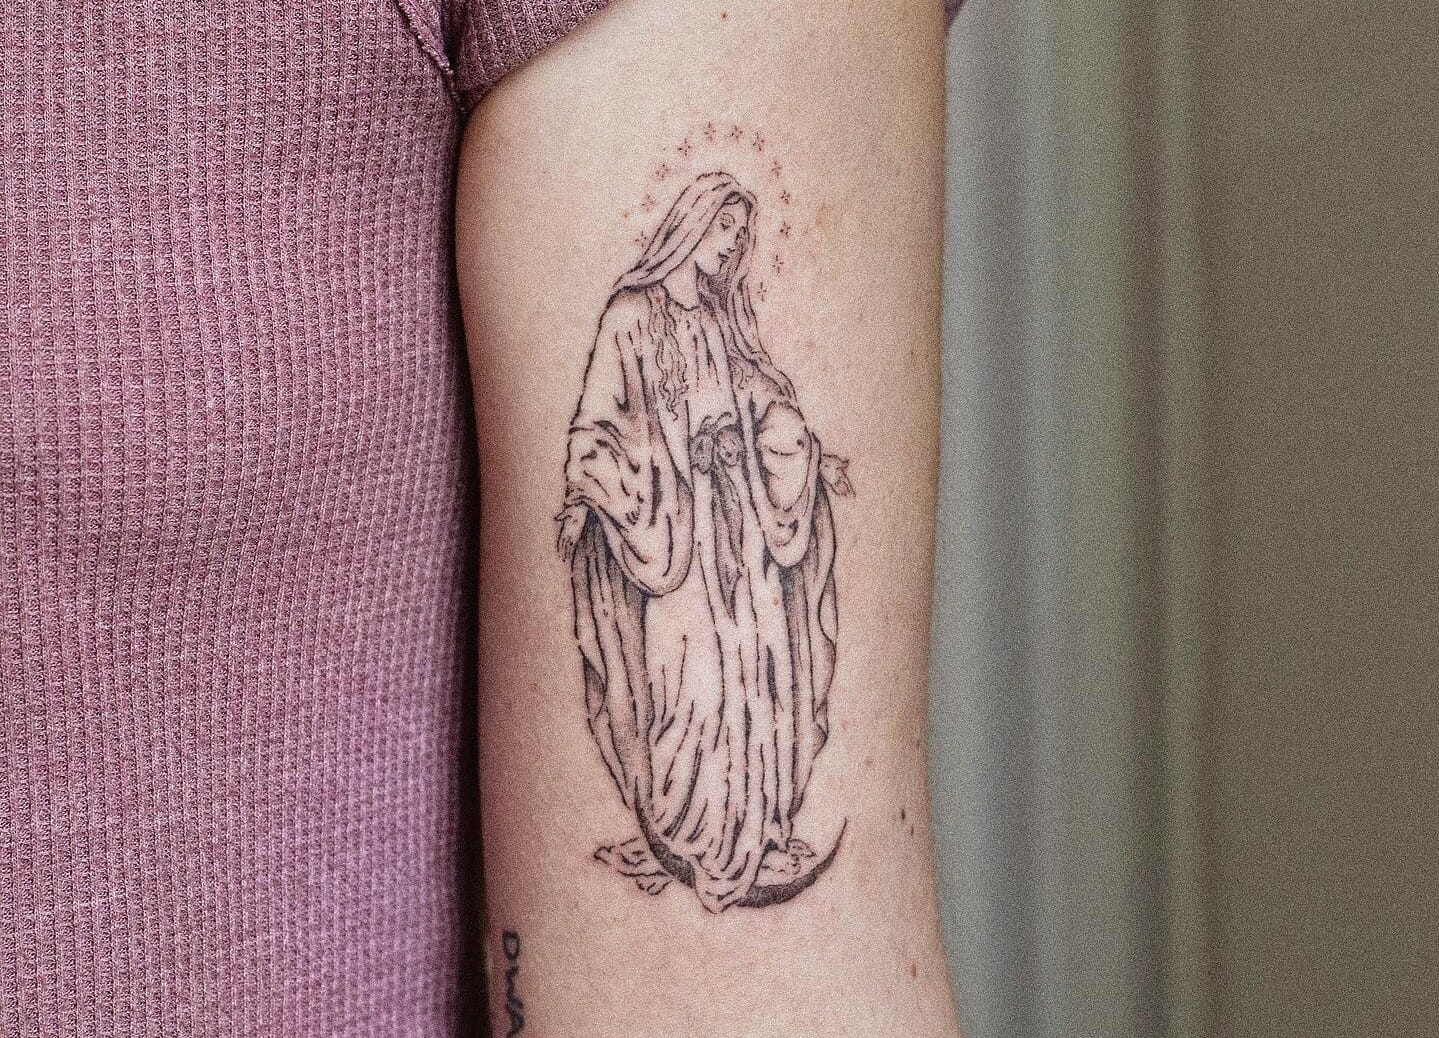 10 Virgin Mary Tattoo Forearm Ideas That Will Blow Your Mind! | Outsons | Men's Fashion Tips And Style Guides